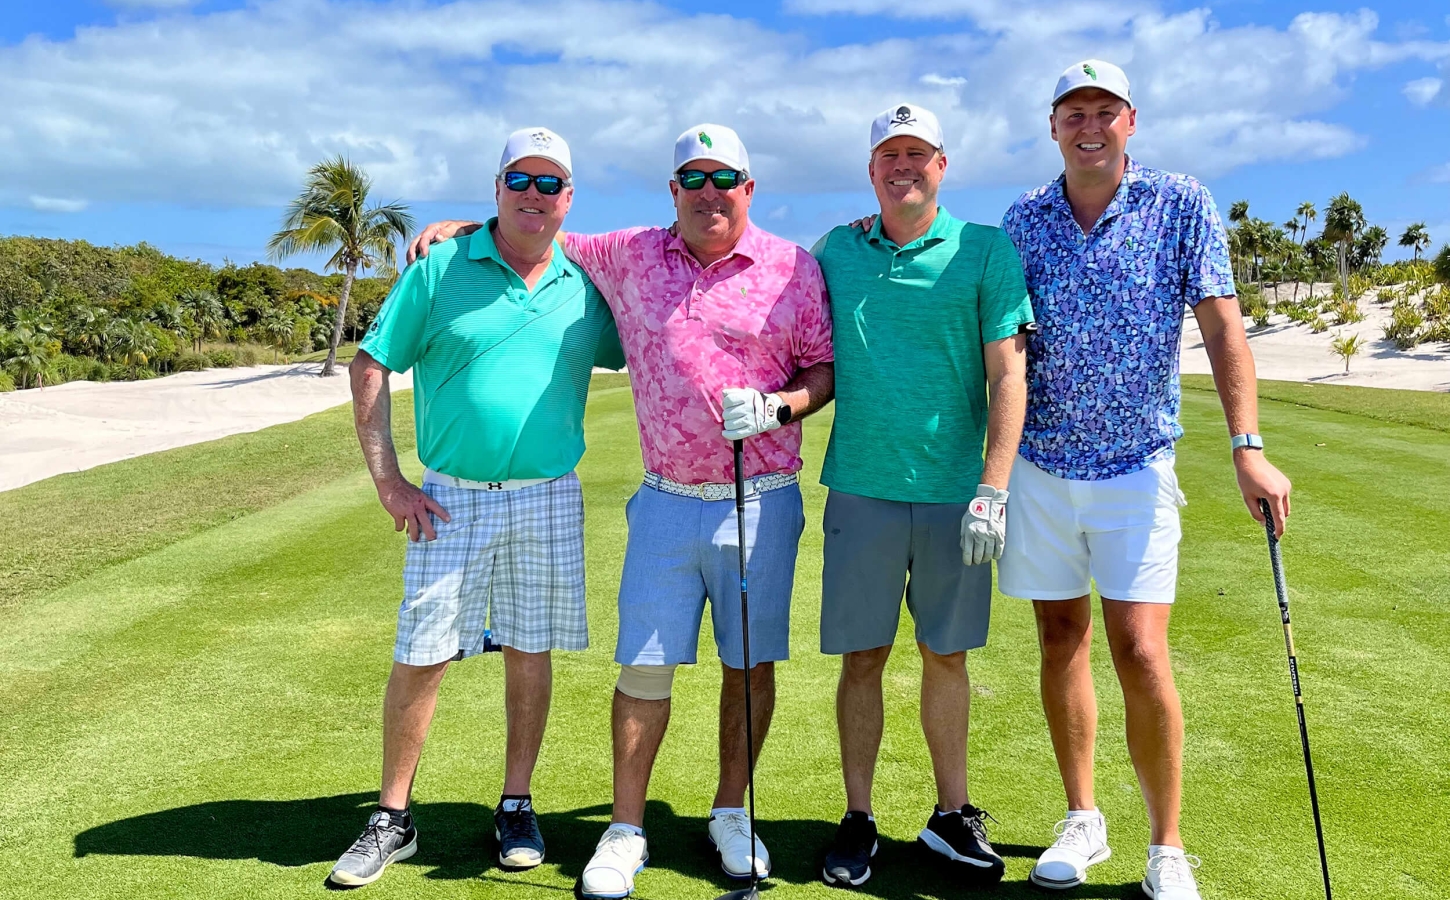 Golf players in colorful attire ready for a game at The Abaco Club, highlighting the exclusive club lifestyle